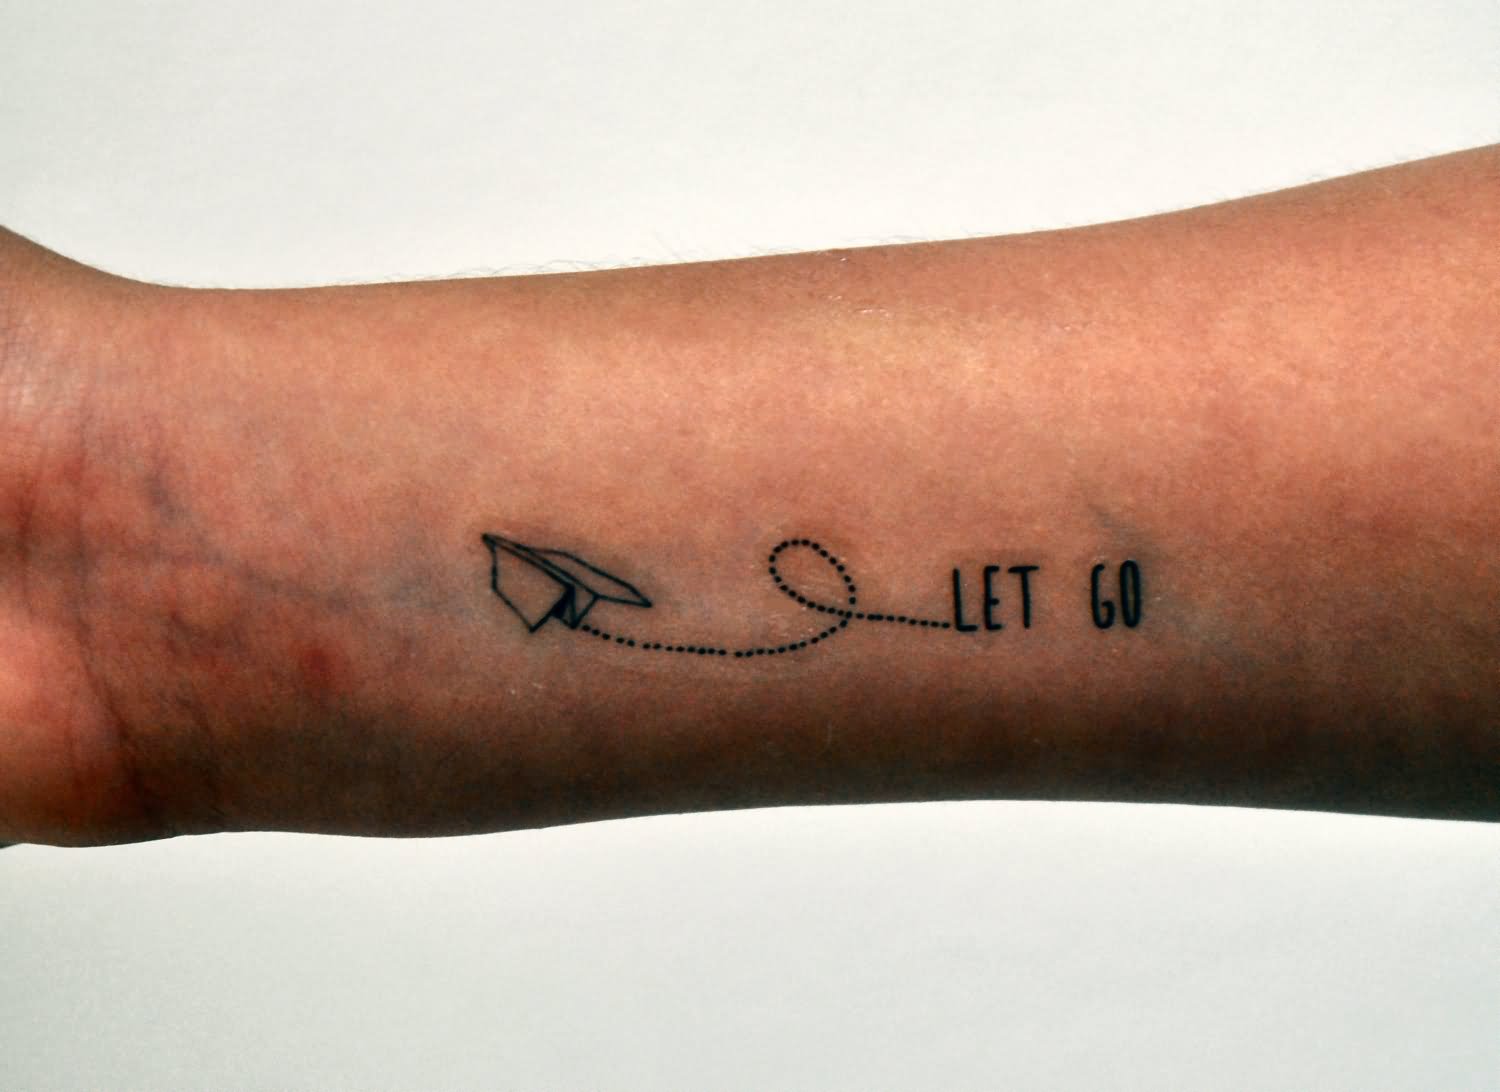 Let Go - Paper Plane Tattoo On Forearm